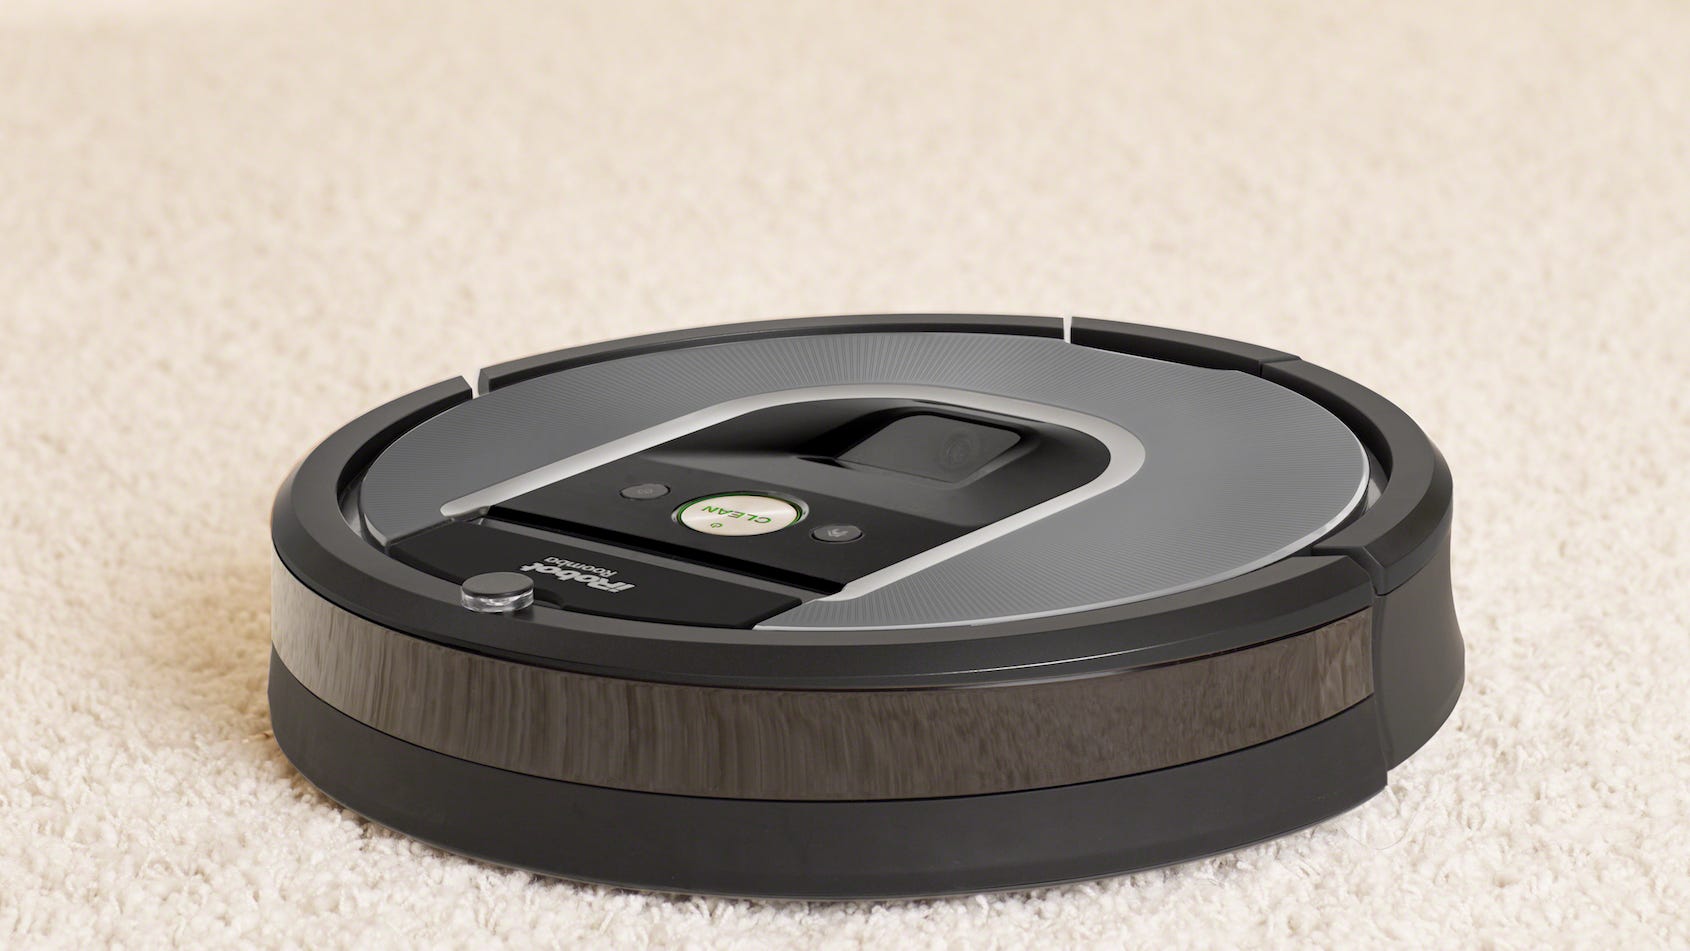 Cyber Monday 2020: best Roomba deals right now